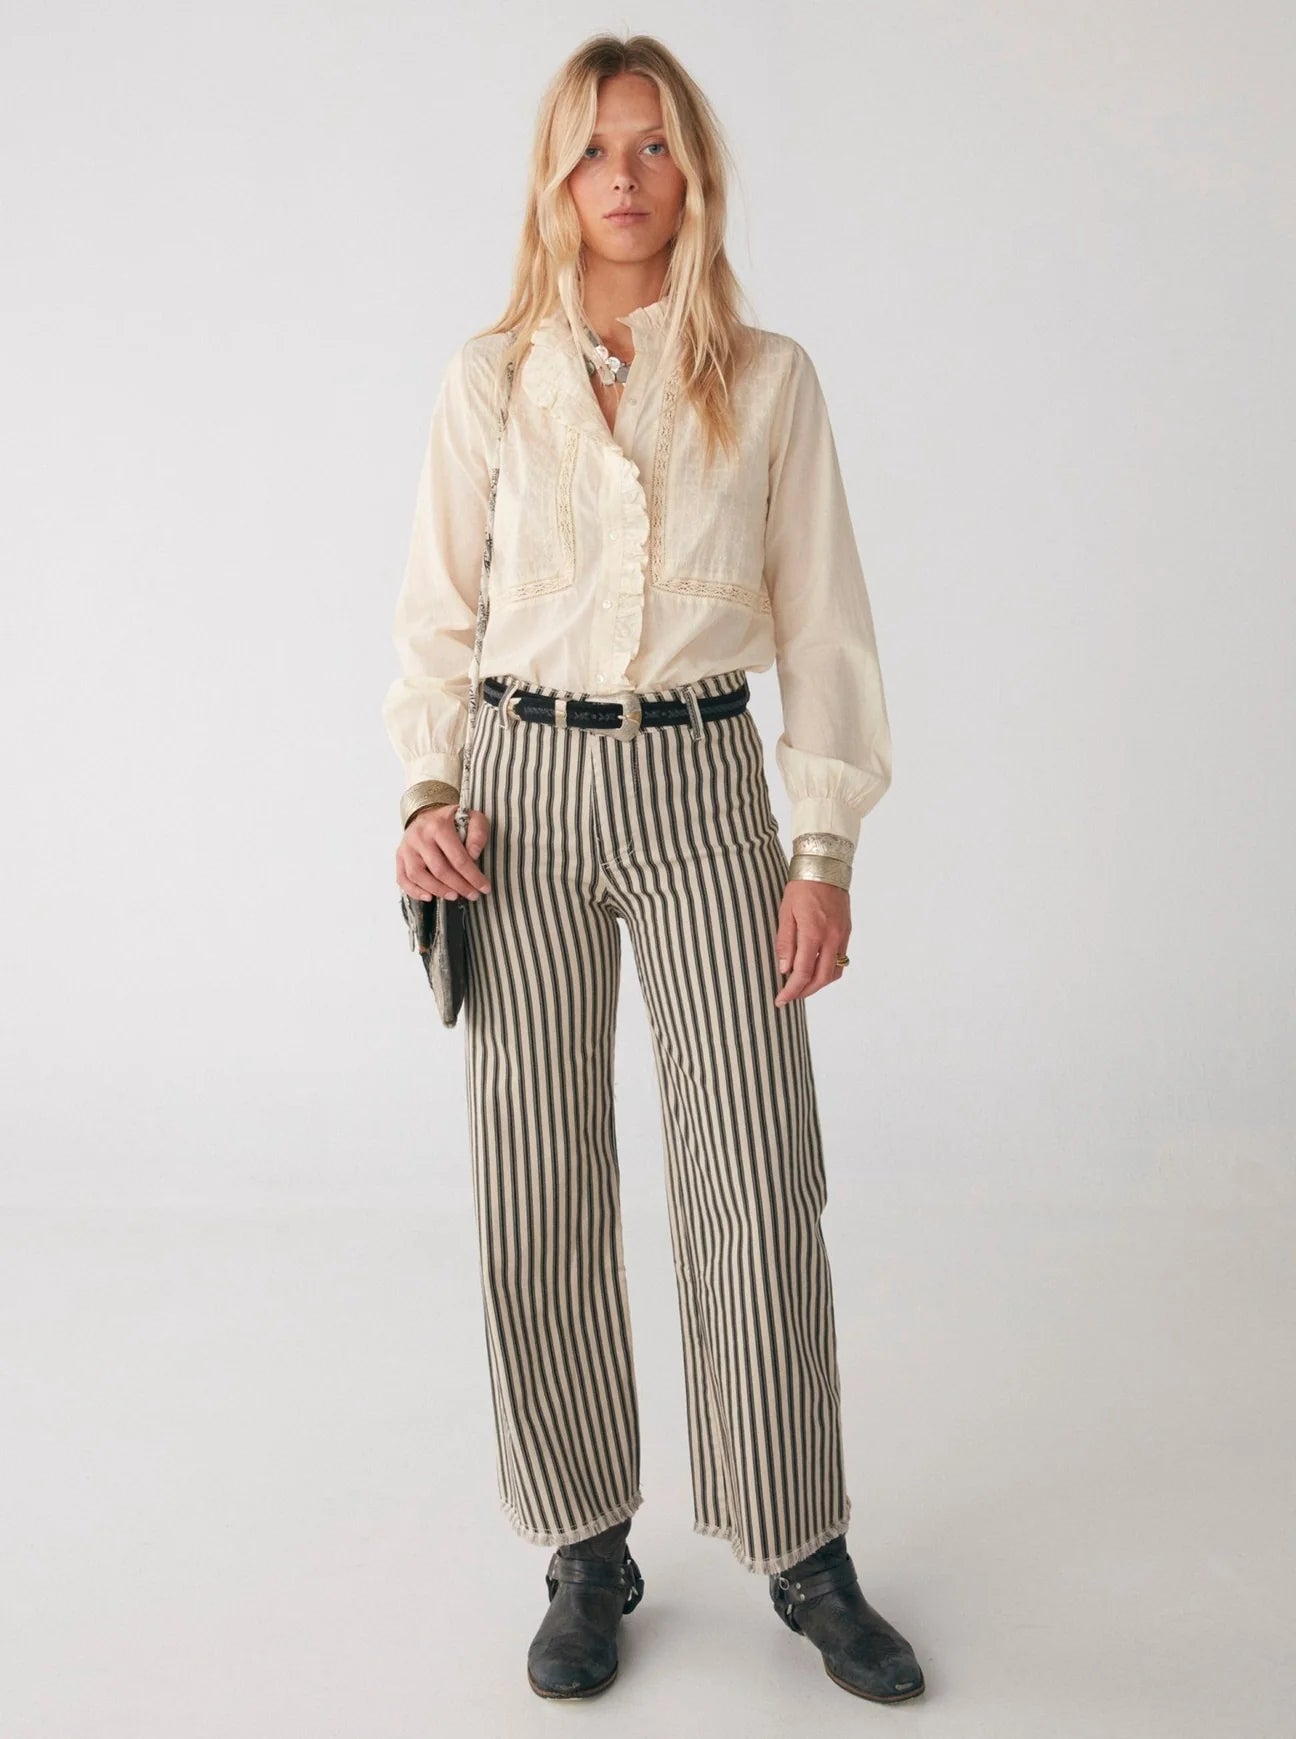 A woman wearing striped pants and a Riya Blouse - Victorian Ivory with embroidery from Maison Hotel.